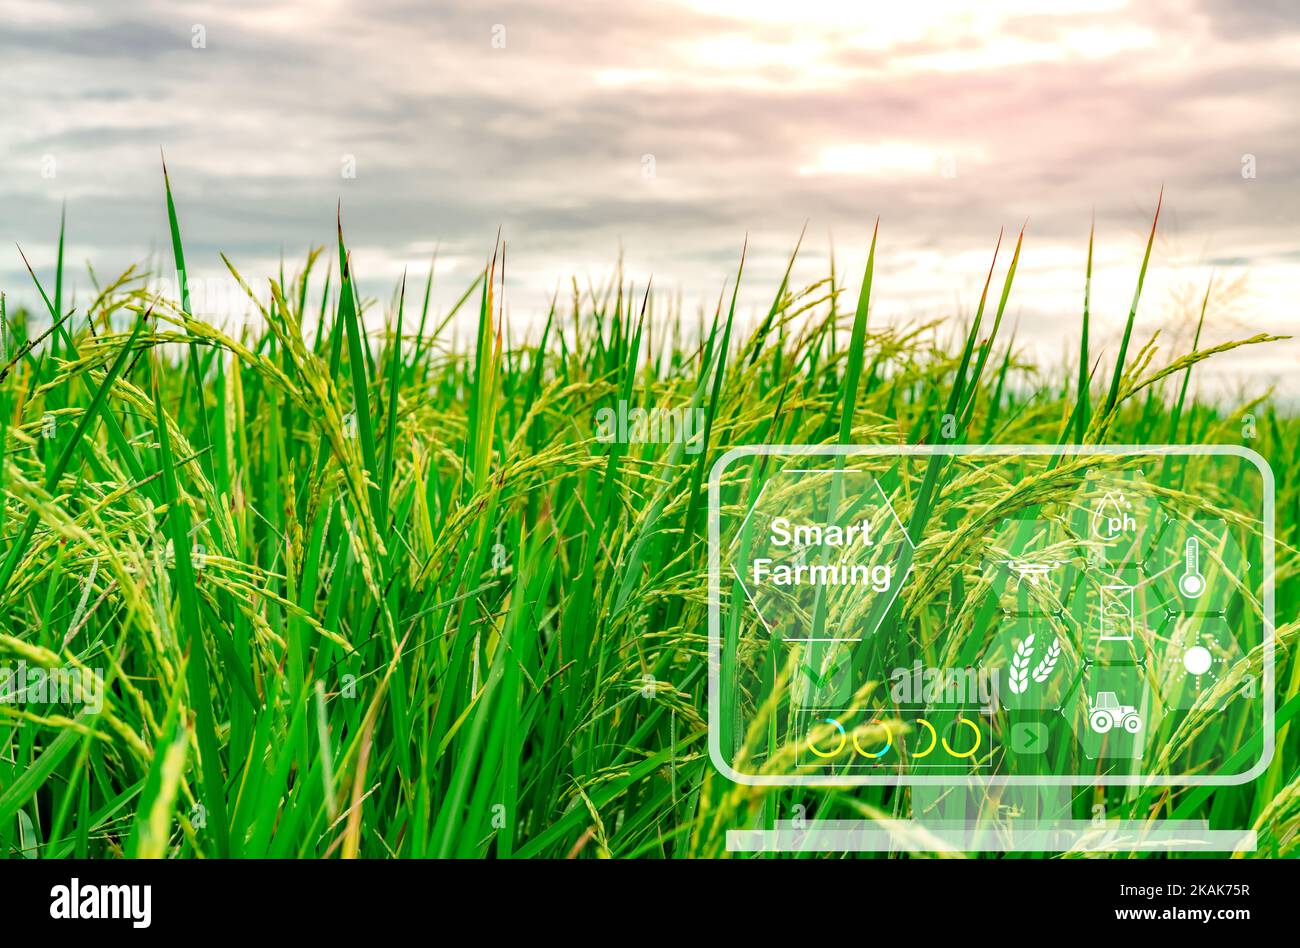 Smart agriculture with modern technology concept. Rice farm field and icon of smart farming concept. Sustainable agriculture. Precision agriculture. Stock Photo